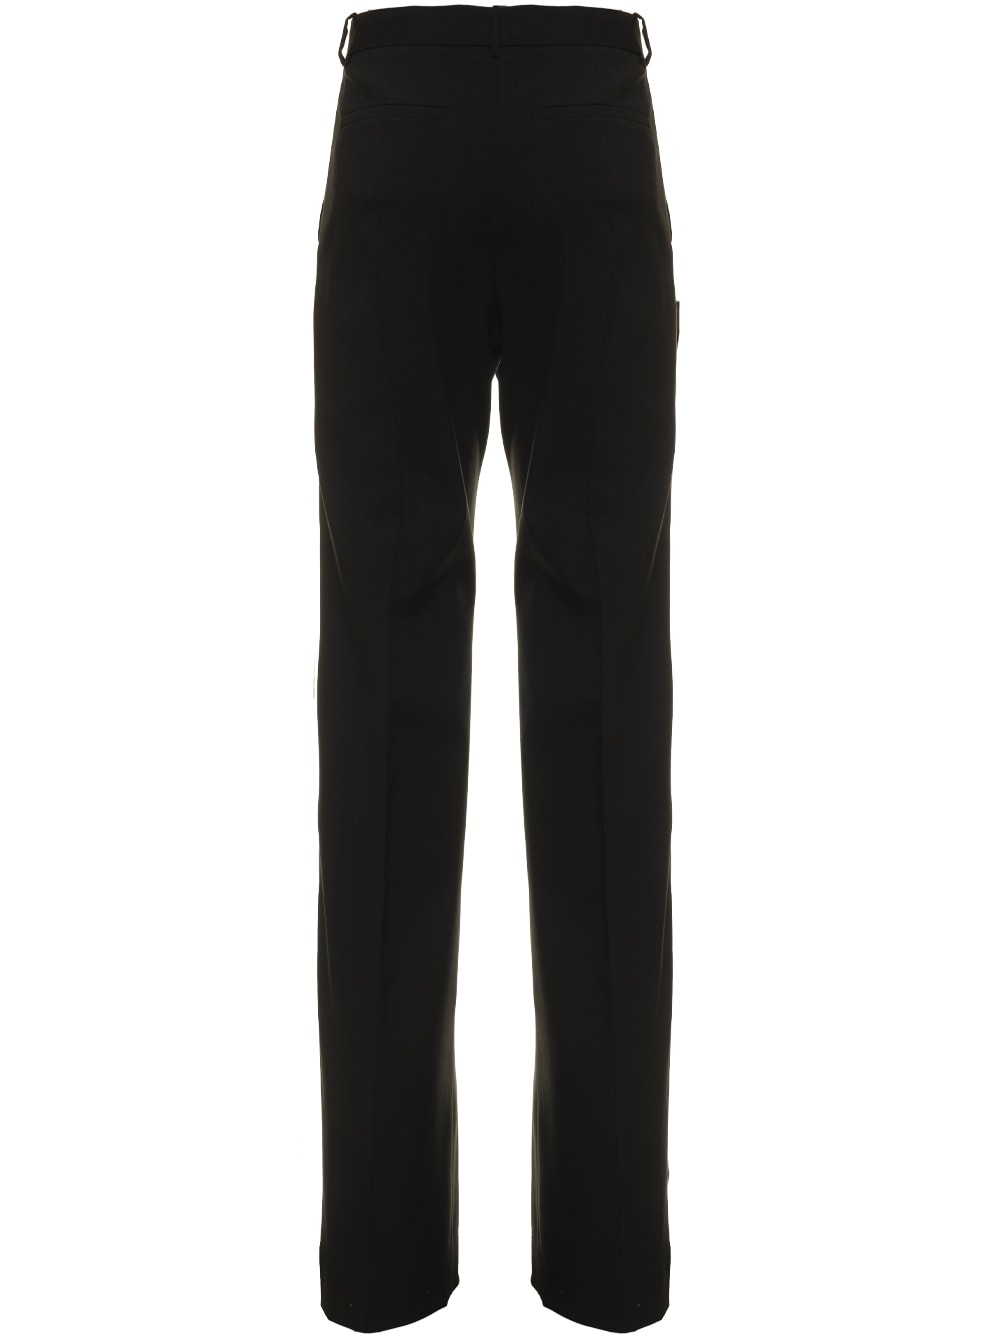 Versace Womens Black Wool Trousers With Safety Pin Details